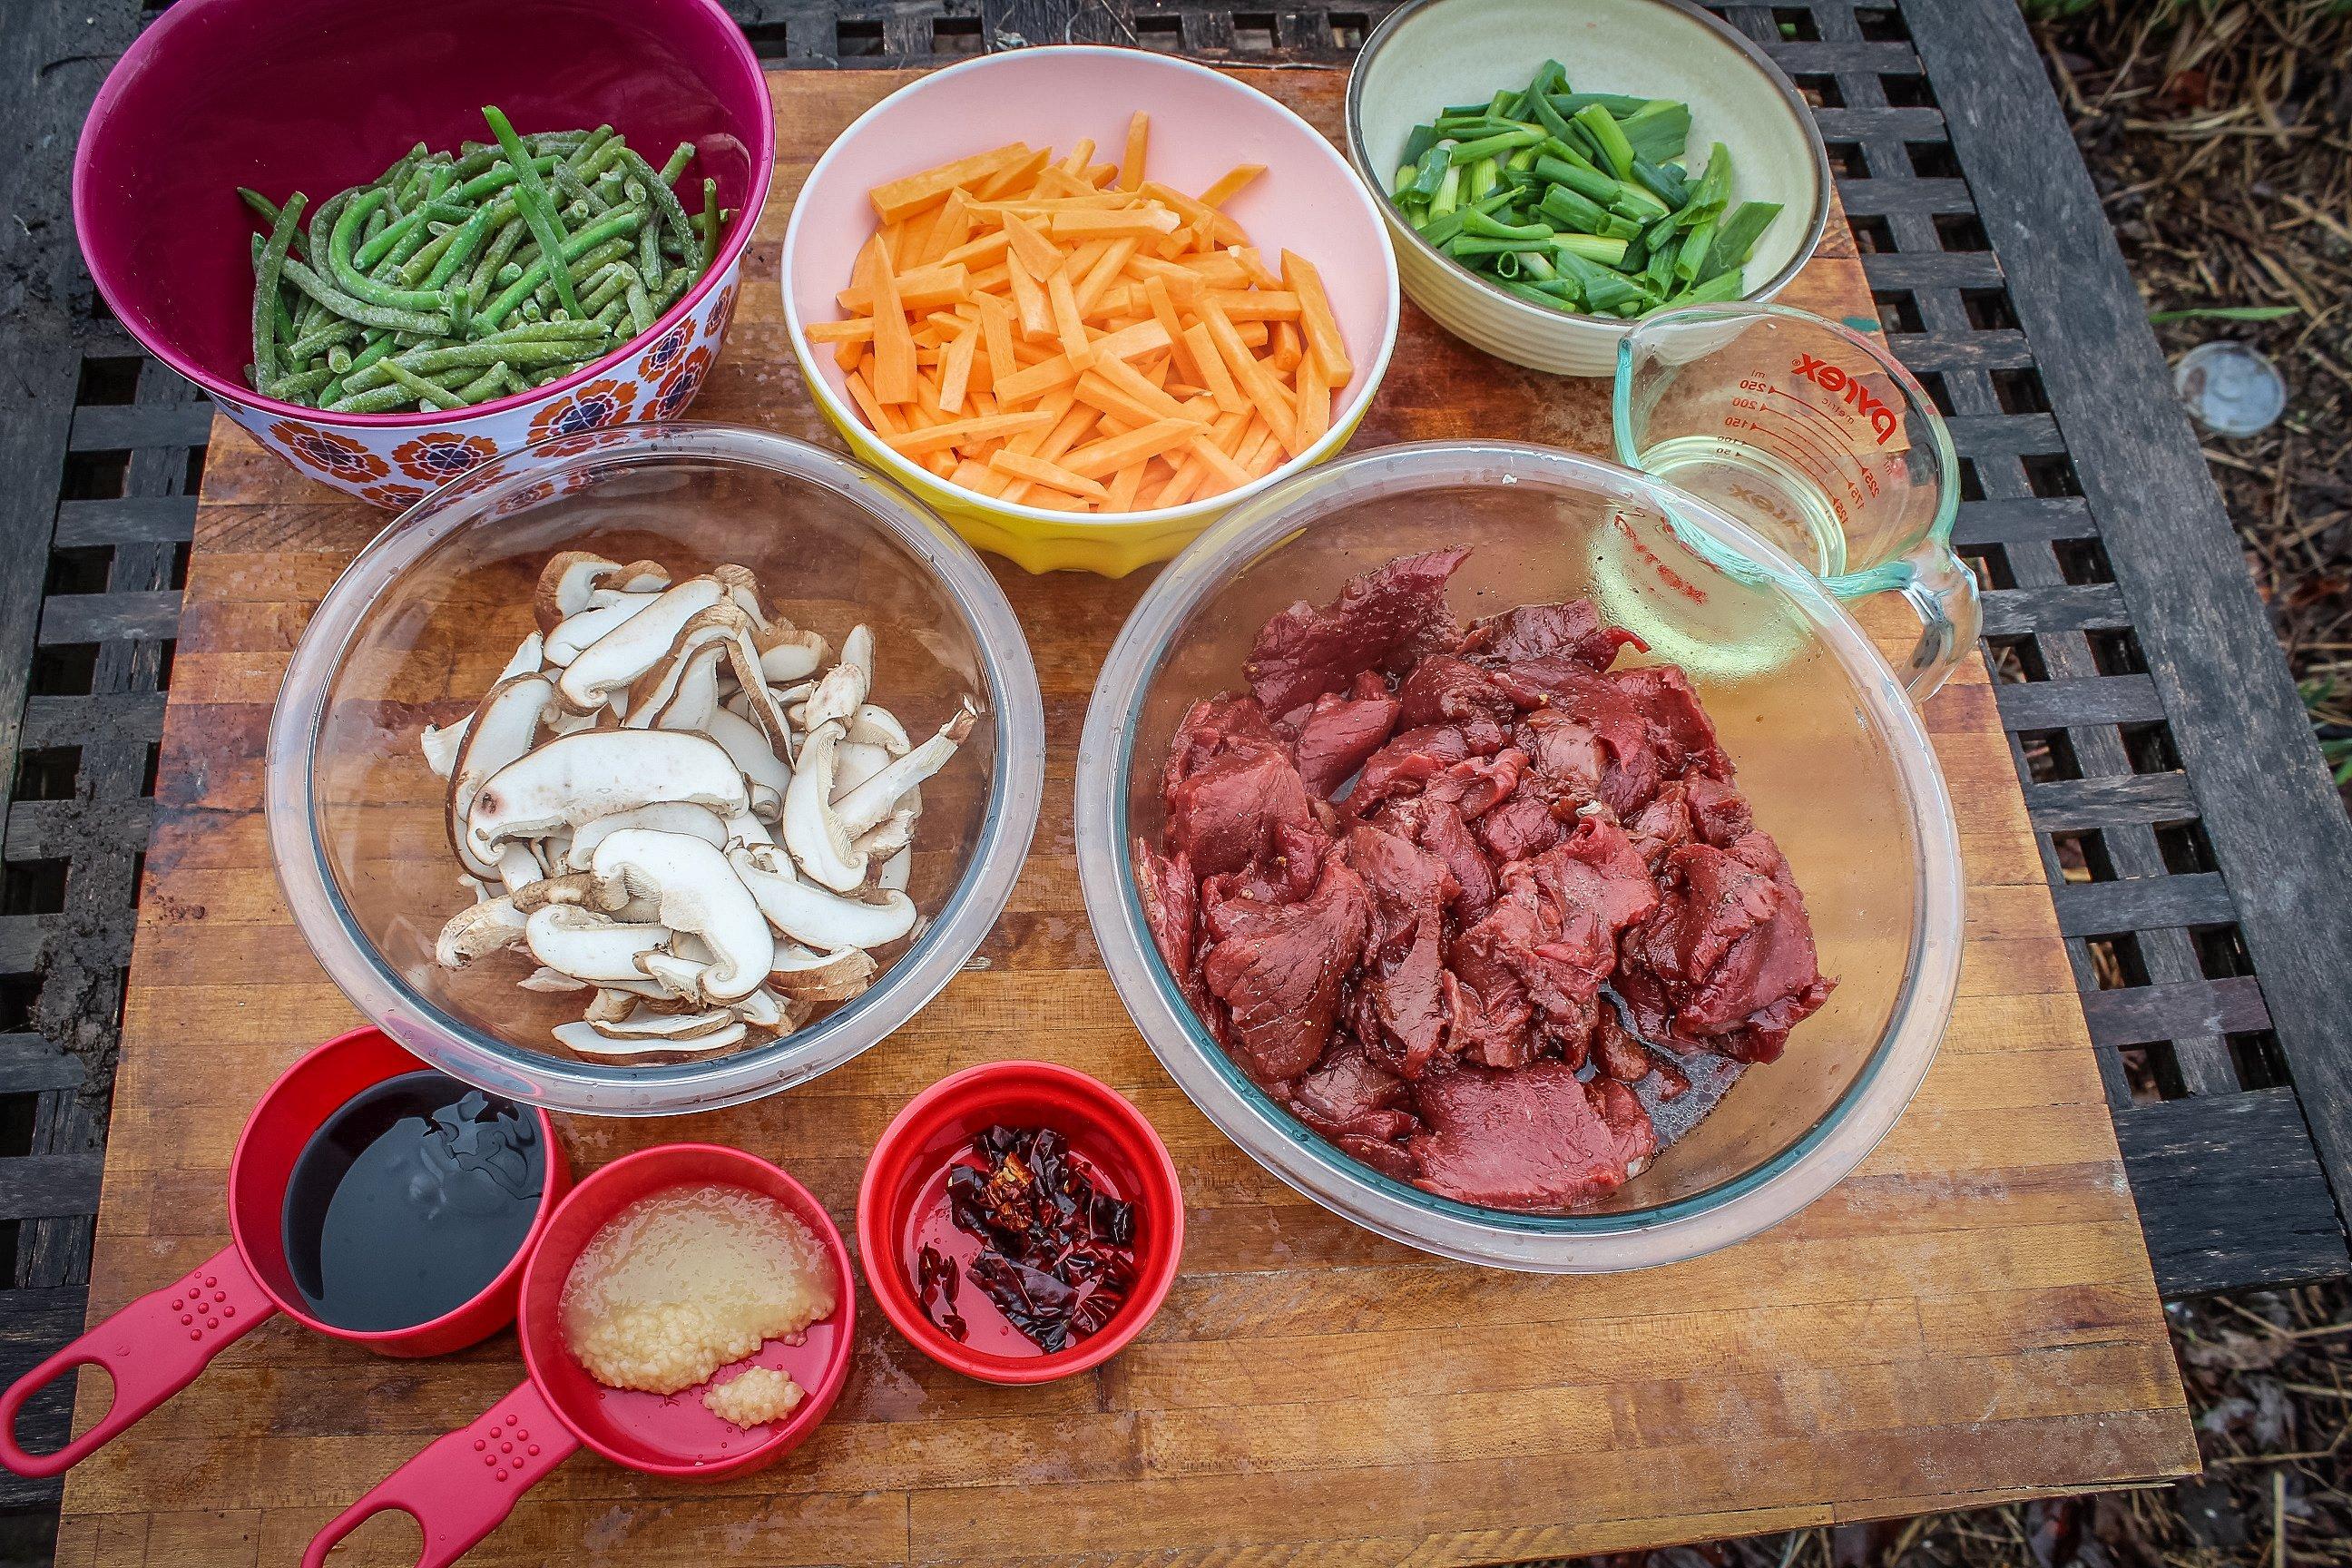 Prep everything in advance to speed the cooking process.